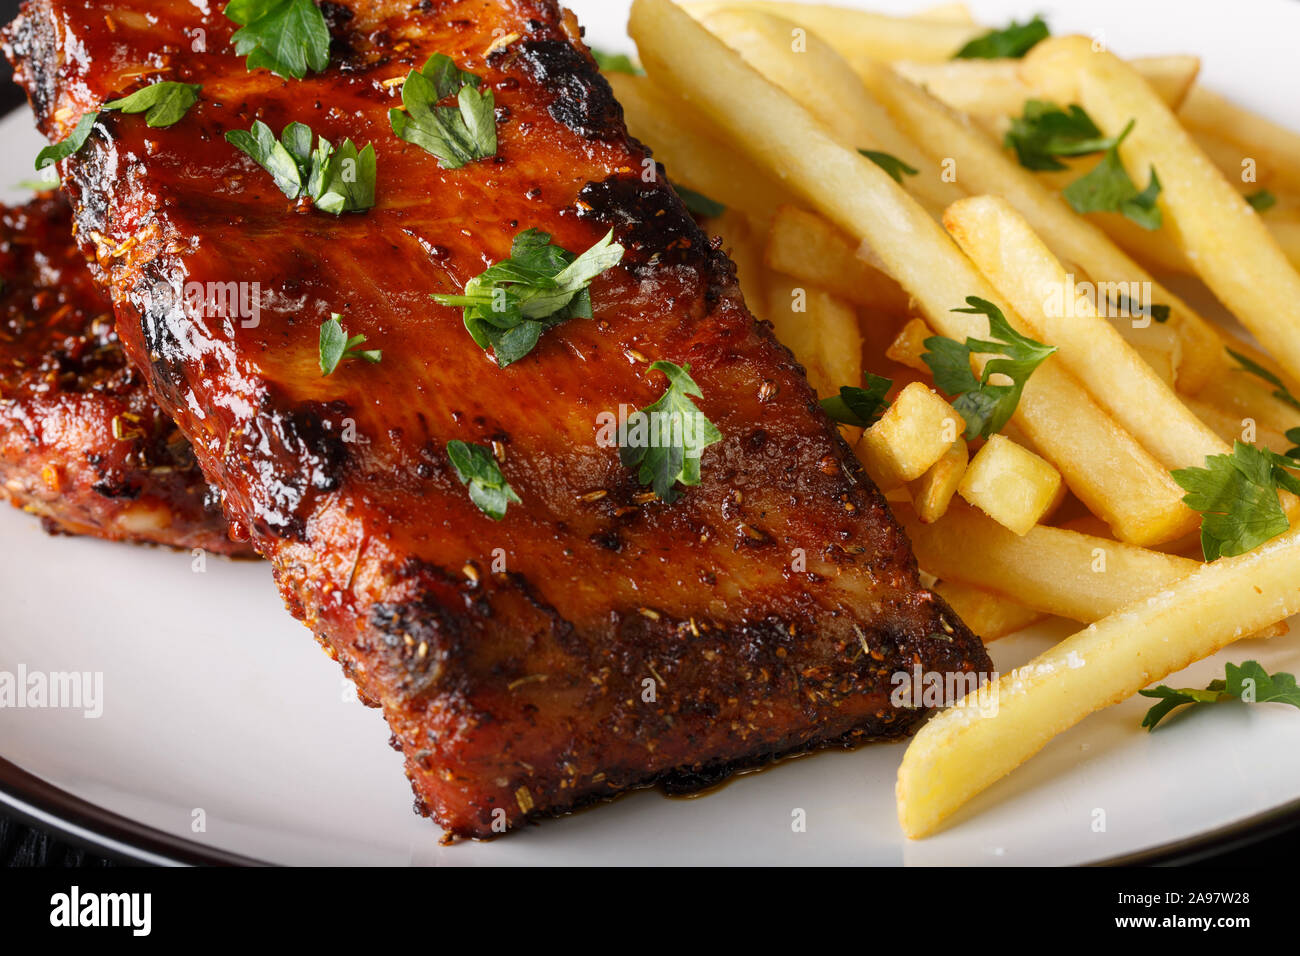 Grilled short ribs served with french fries close-up on a plate on the table. horizontal Stock Photo